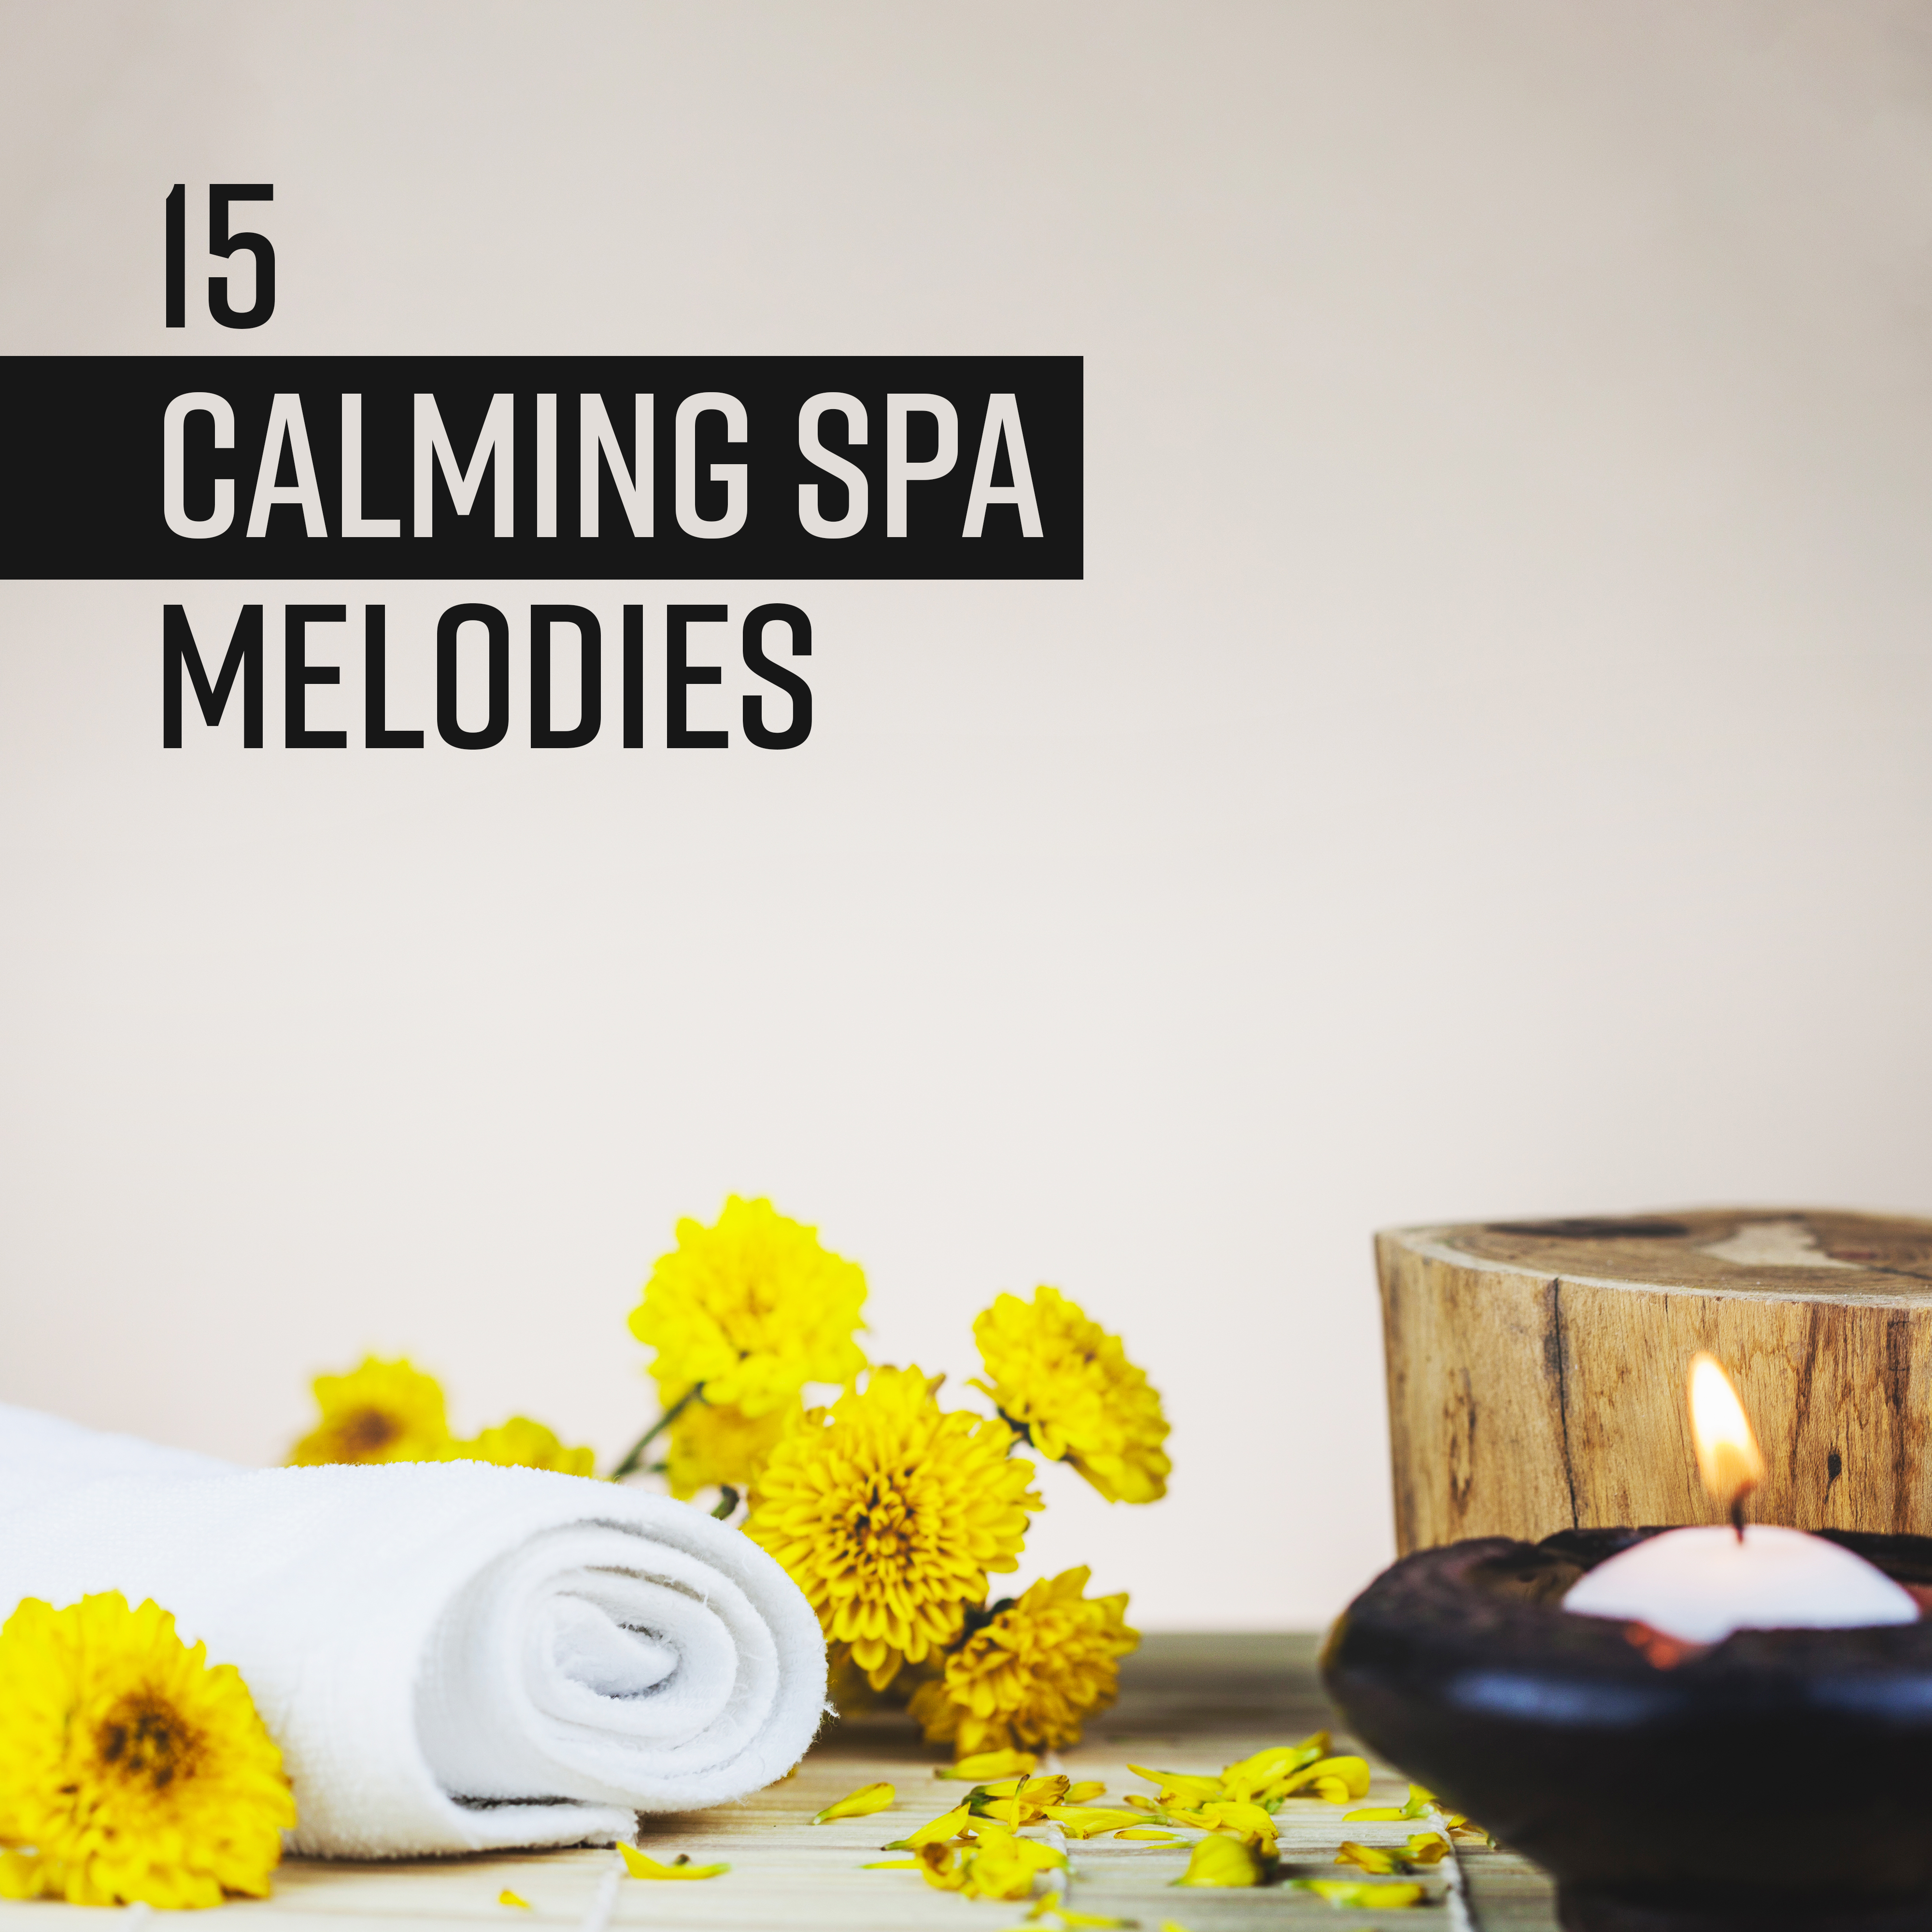 15 Calming Spa Melodies